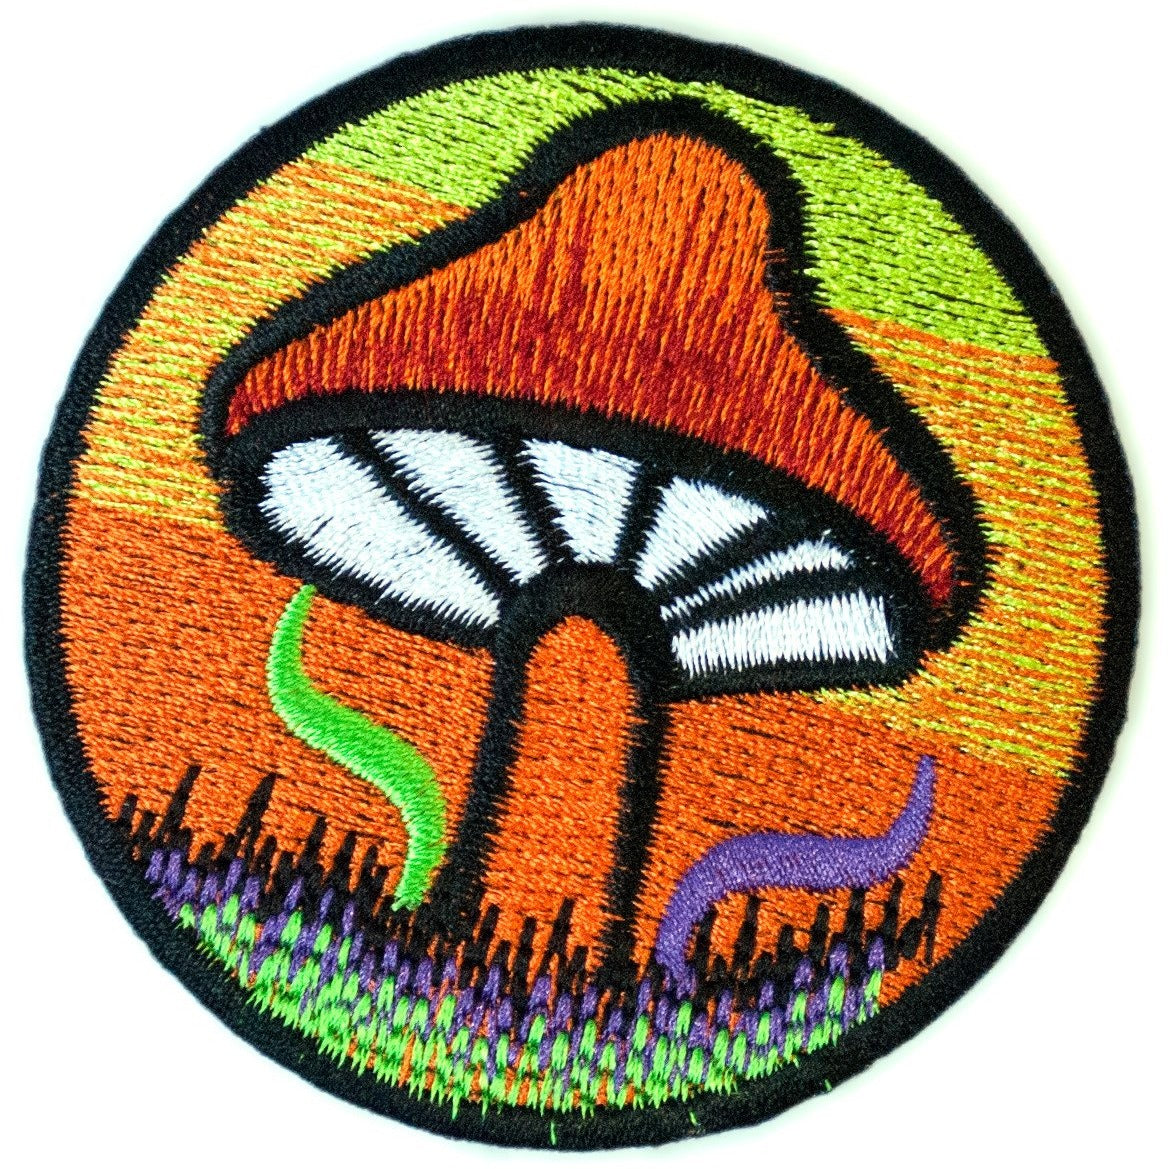 HHO Set 3 Pcs Magic Mushrooms Flower Moon Star Goa Psychedelic Embroidered  Iron on Patch